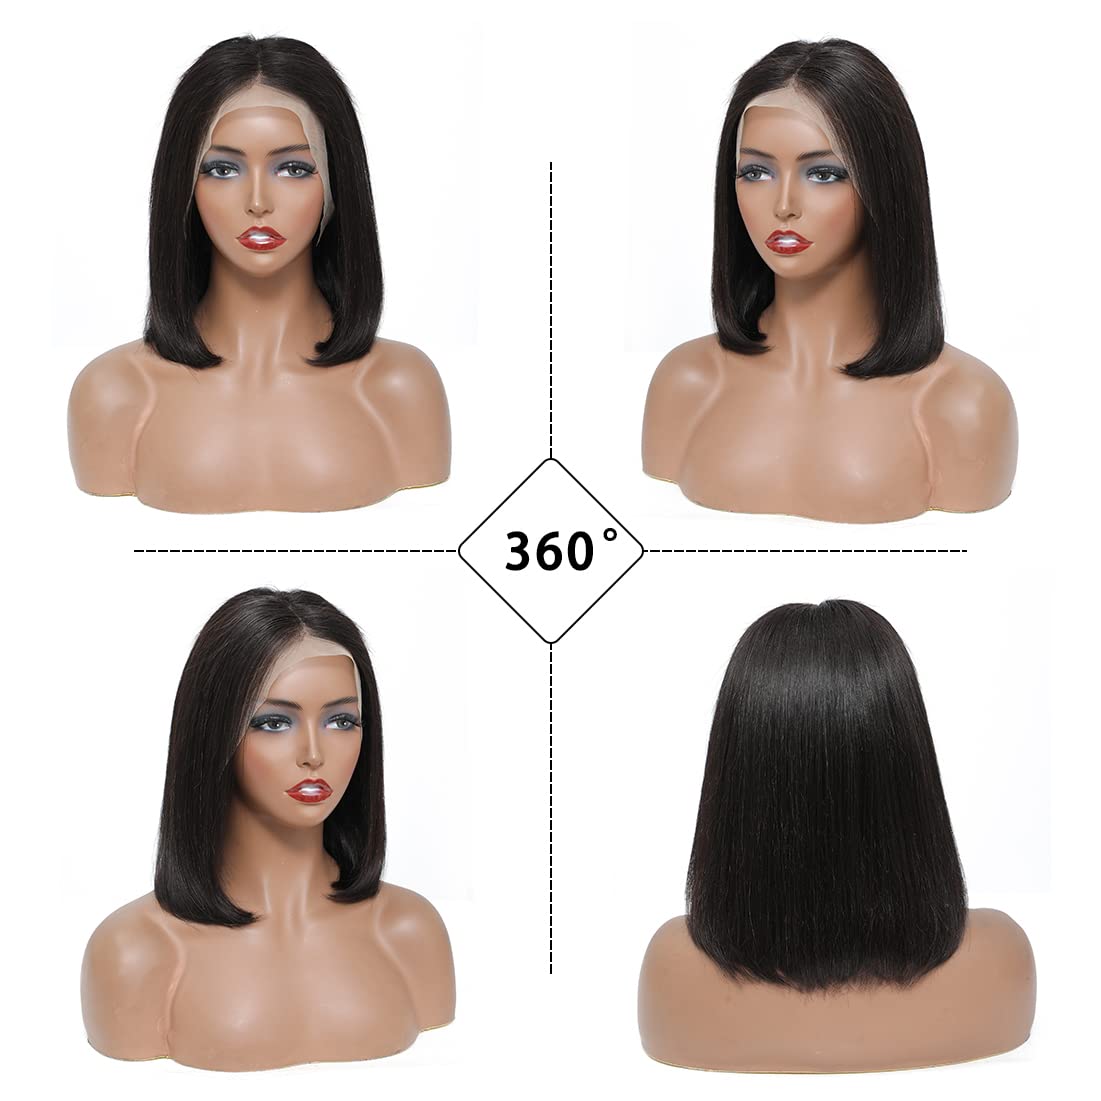 12 Inches Lace Front Bob Wig - The benefit for subscribers only, limited to one order on a first-come, first-served basis.